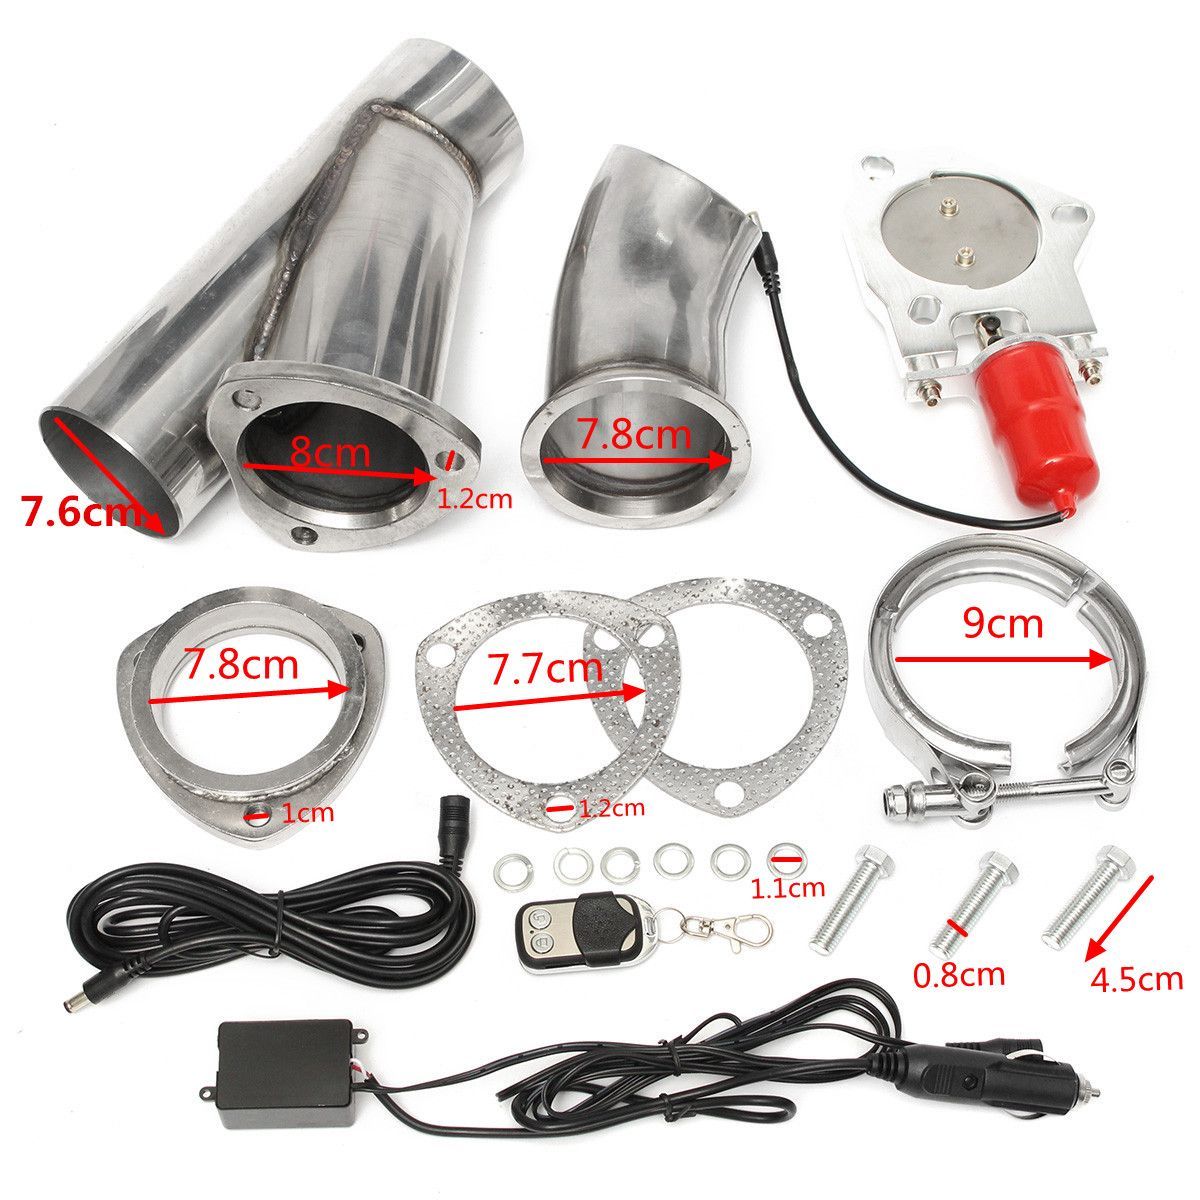 3-Inch-Electric-Exhaust-Valve-Catback-Down-Pipe-Systems-Kit-Remote-Intelligent-E-Cut-1172042